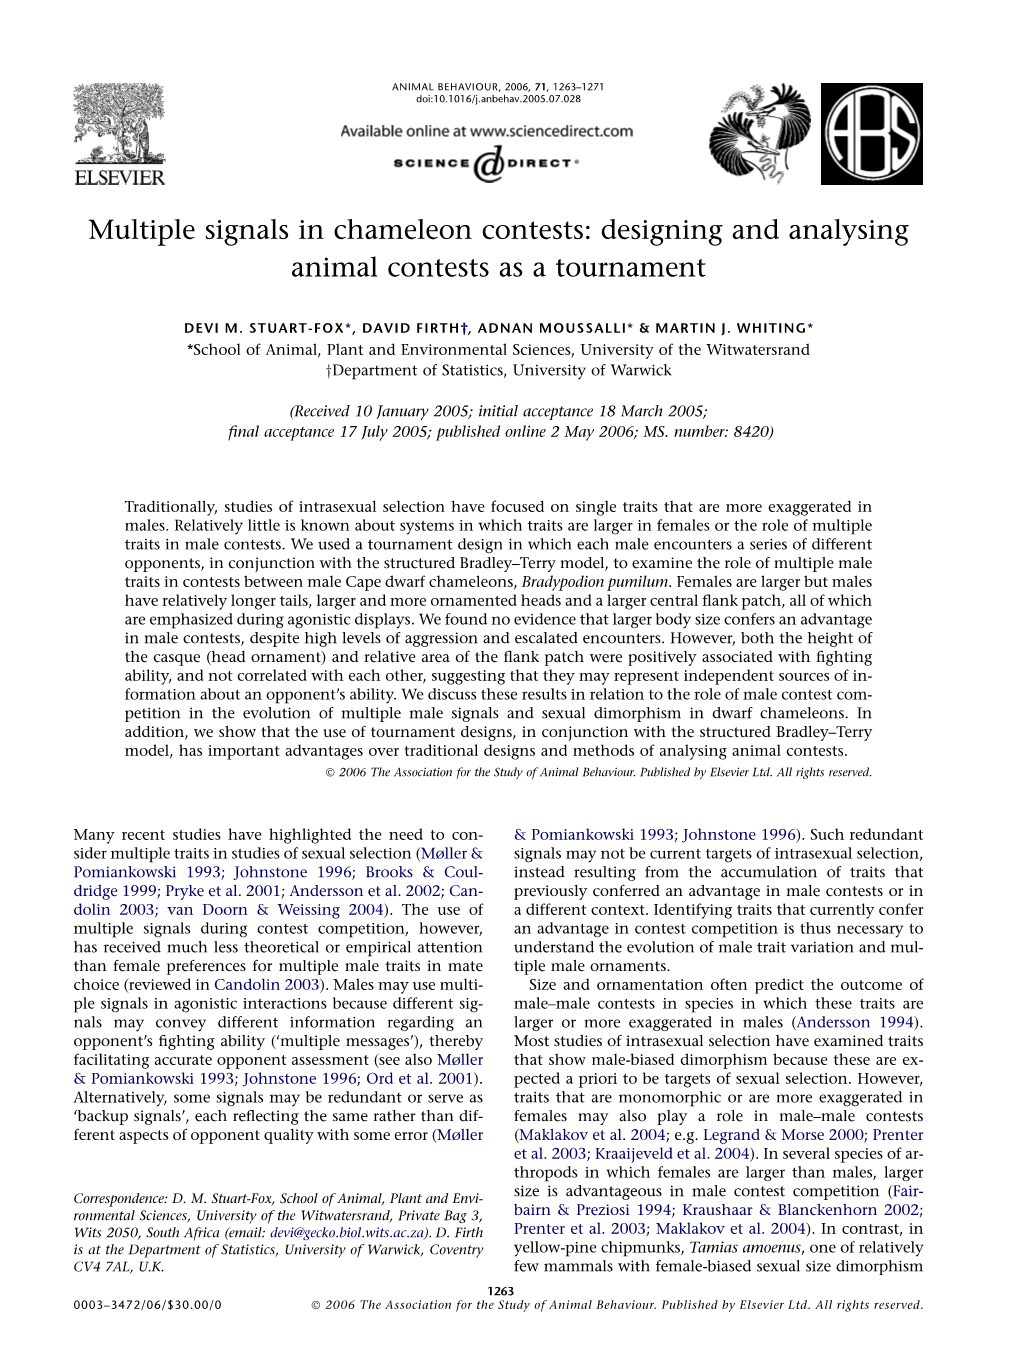 Multiple Signals in Chameleon Contests: Designing and Analysing Animal Contests As a Tournament